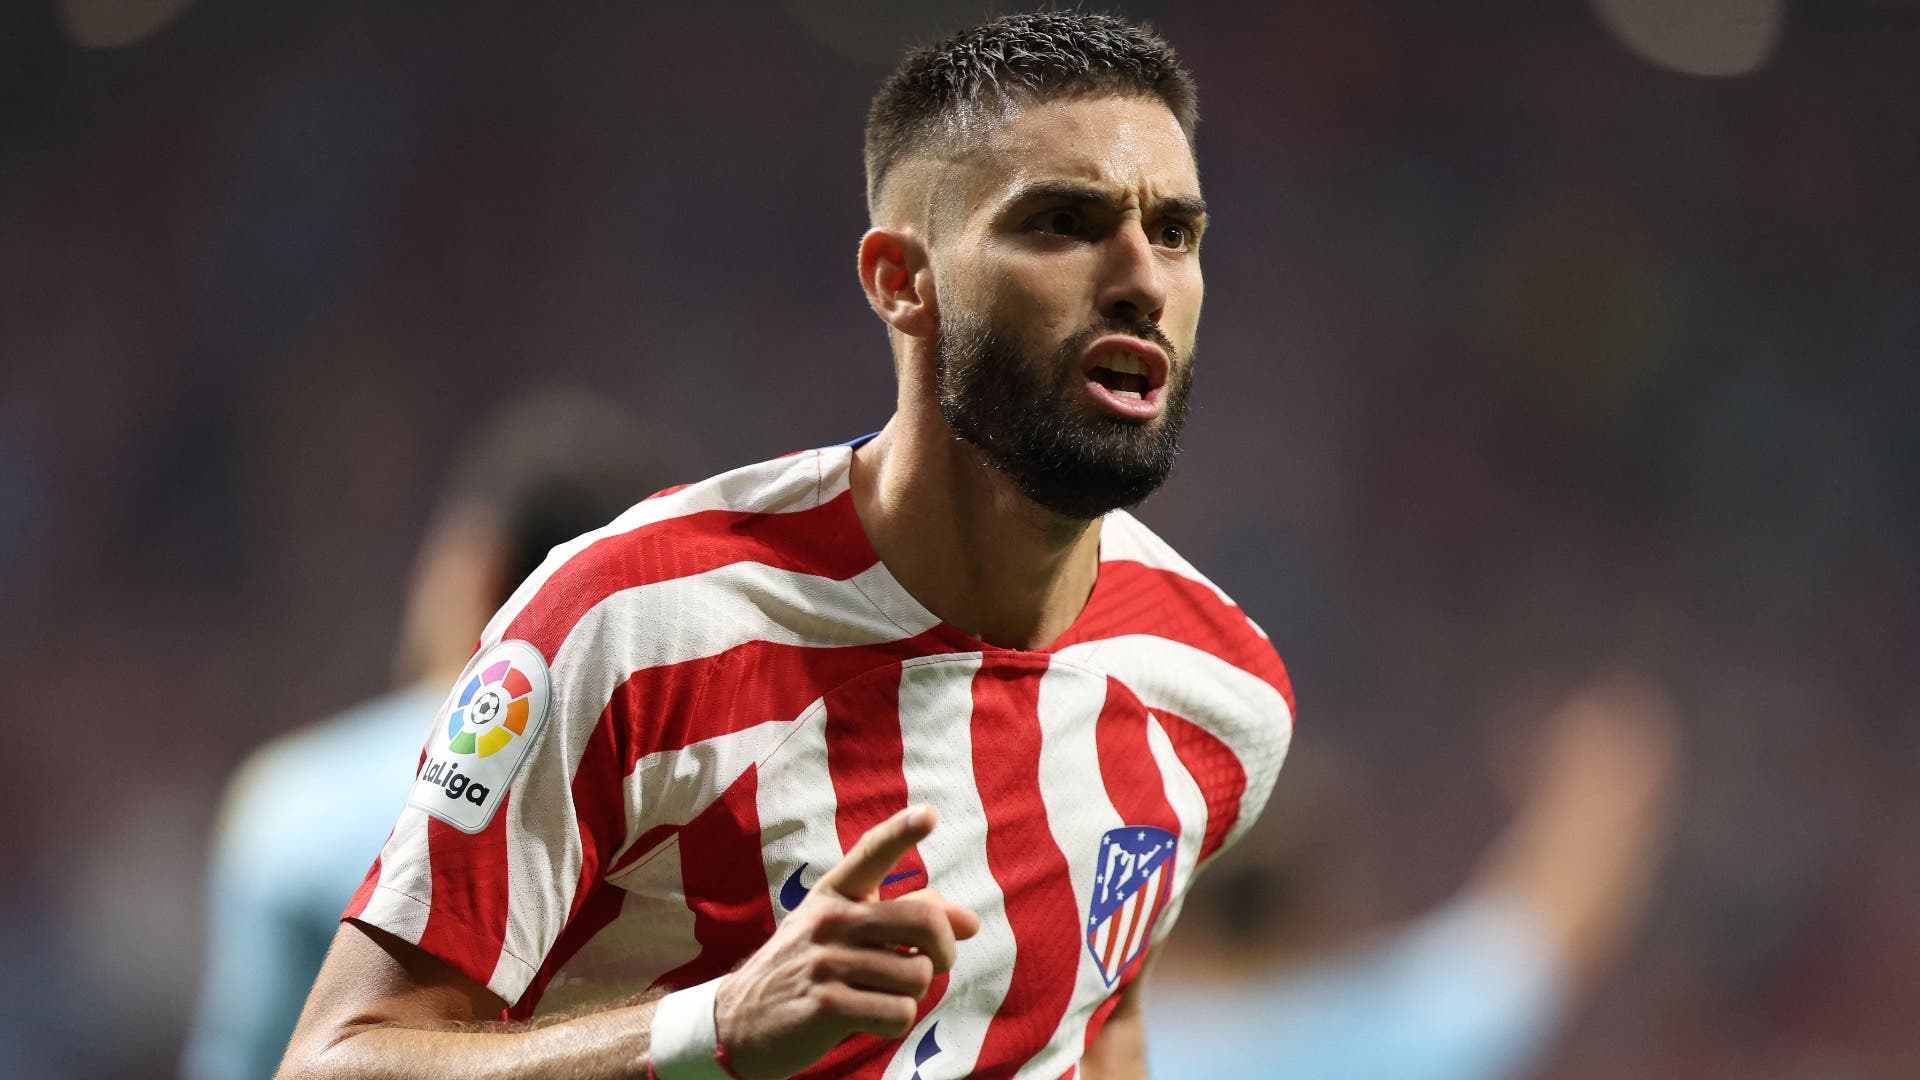 Simeone has a favorite among Atlético's loanees: Carrasco's replacement
	
